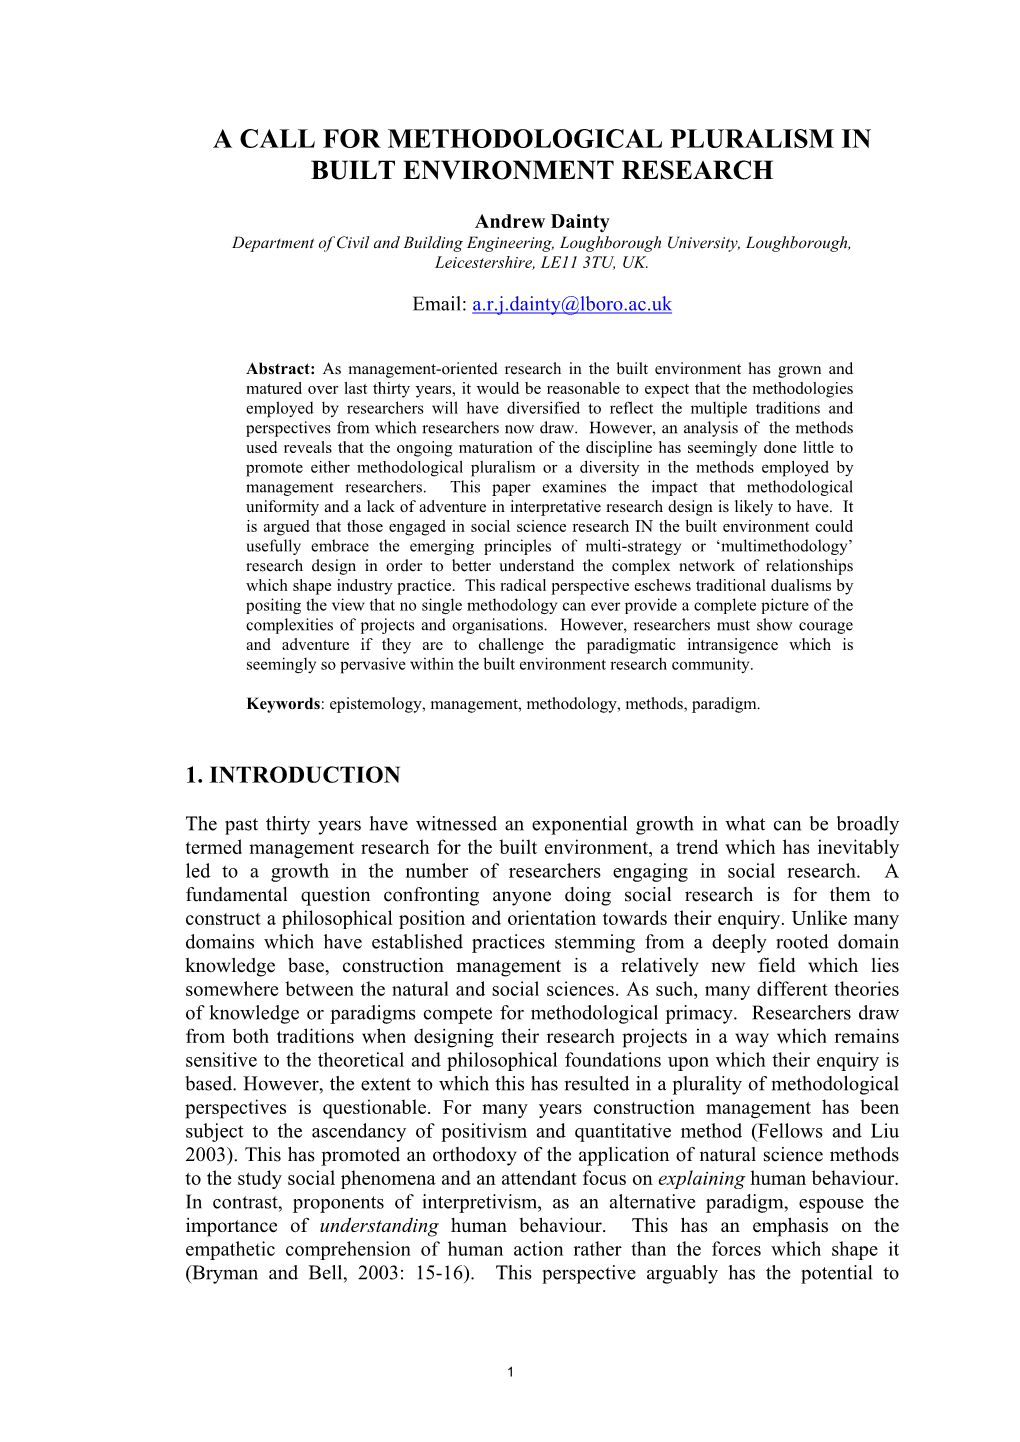 A Call for Methodological Pluralism in Built Environment Research